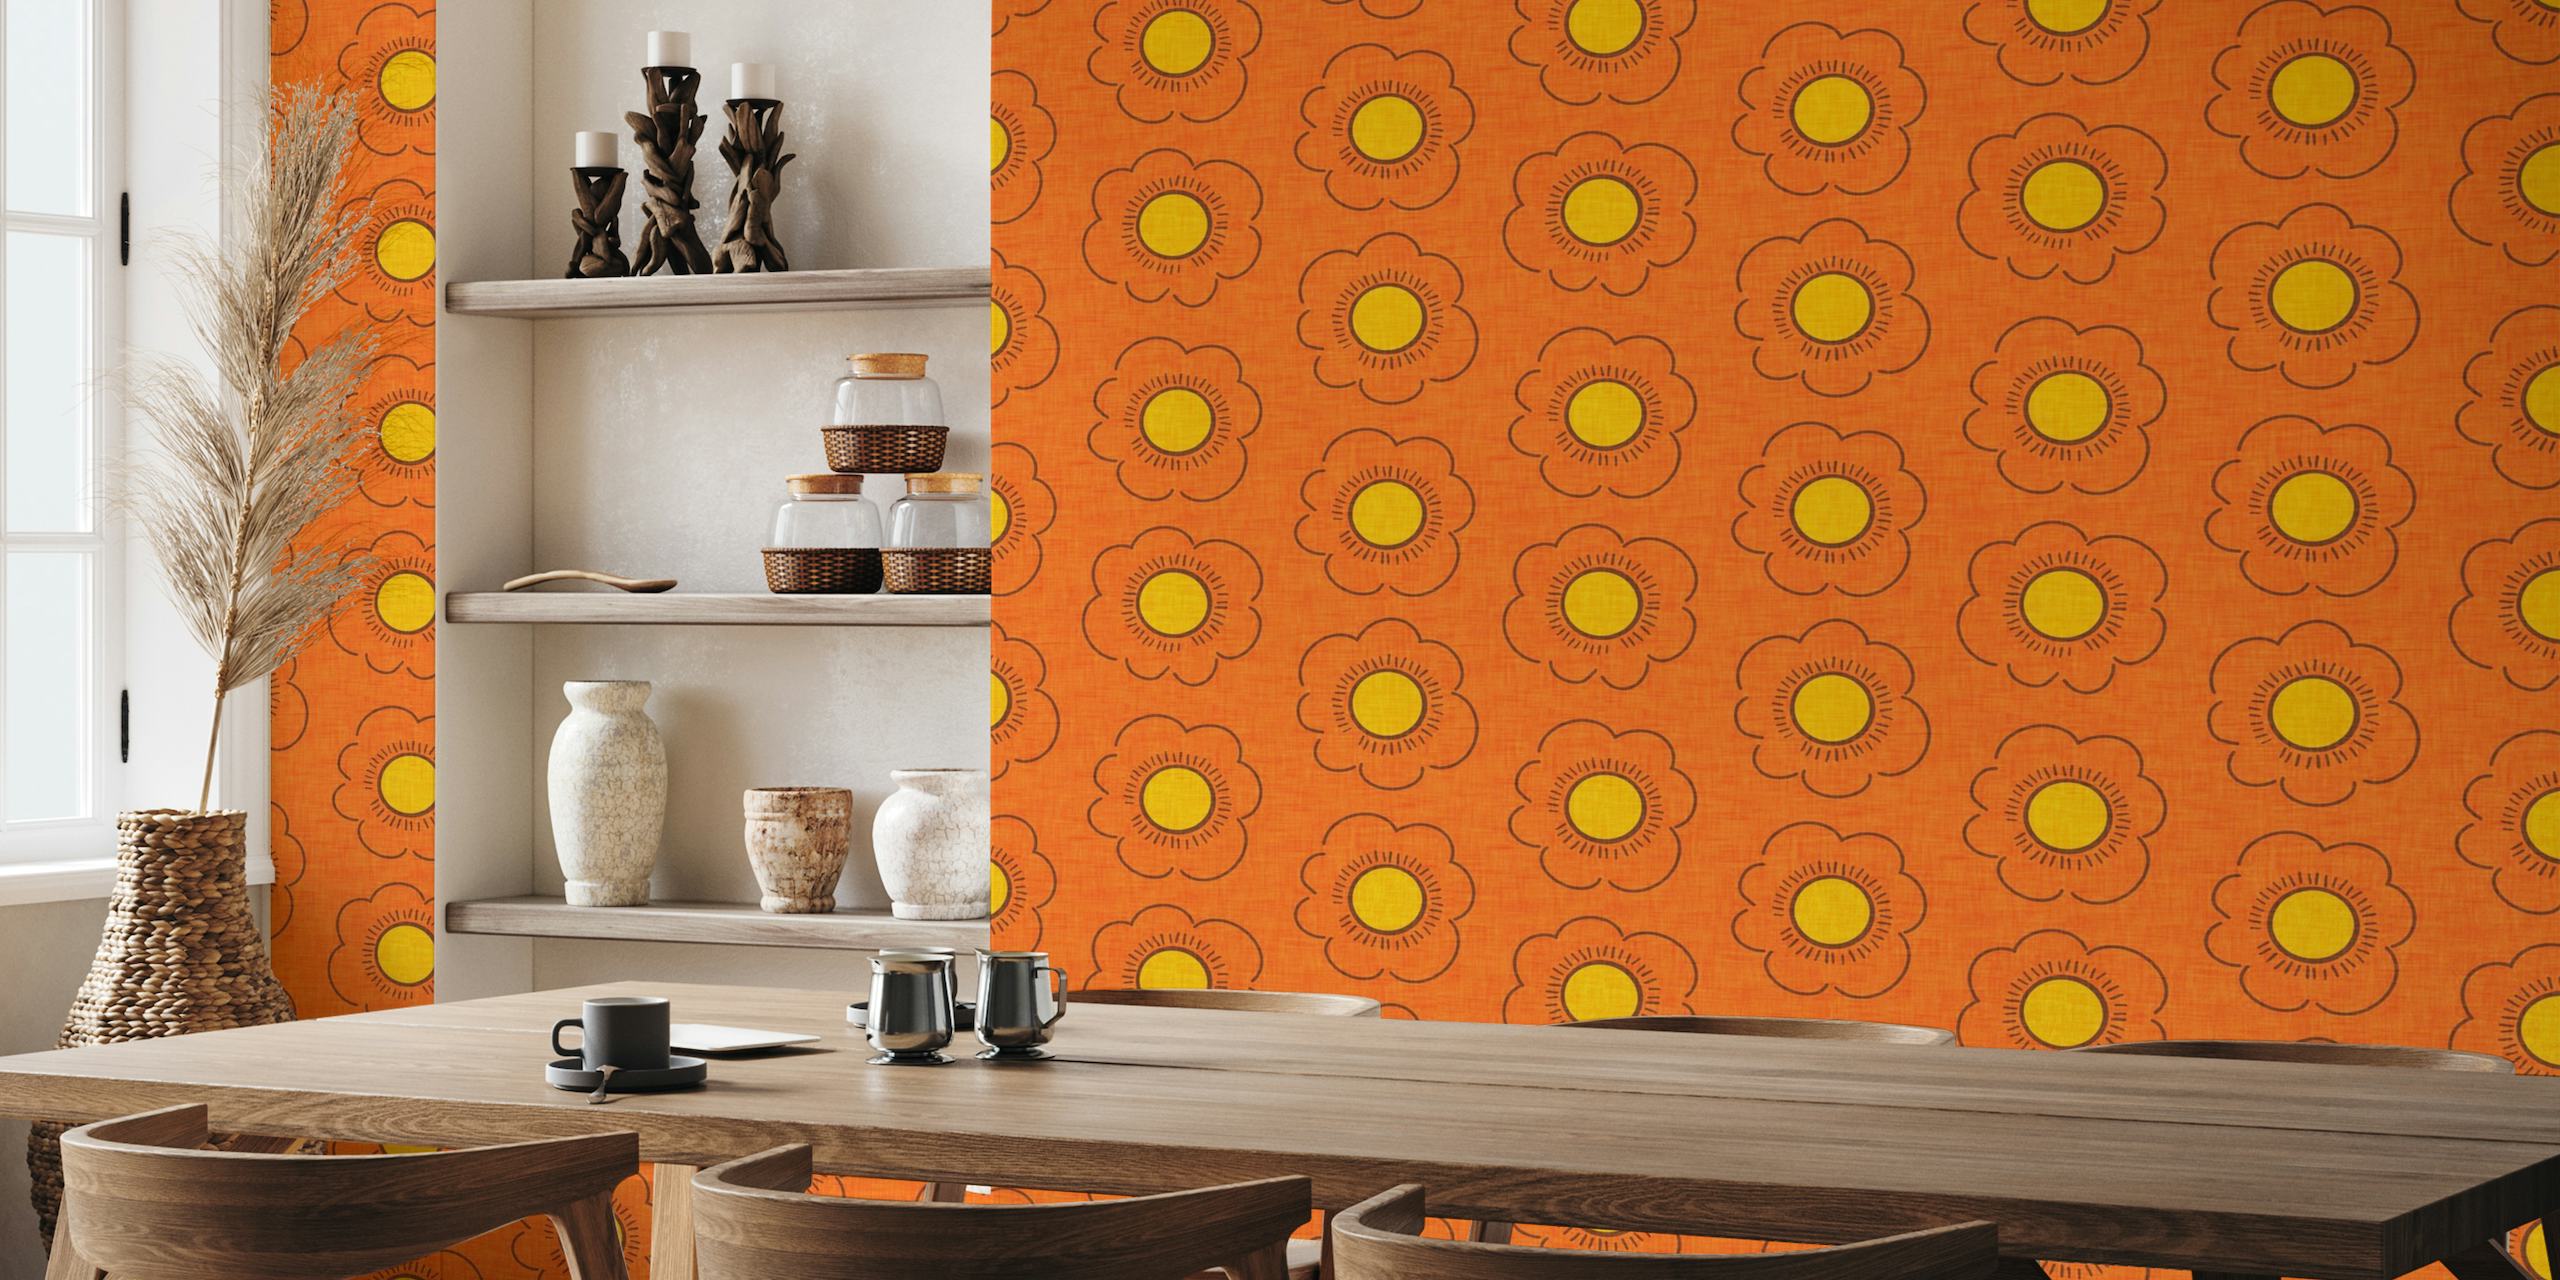 70s inspired orange floral wall mural with mid-century design